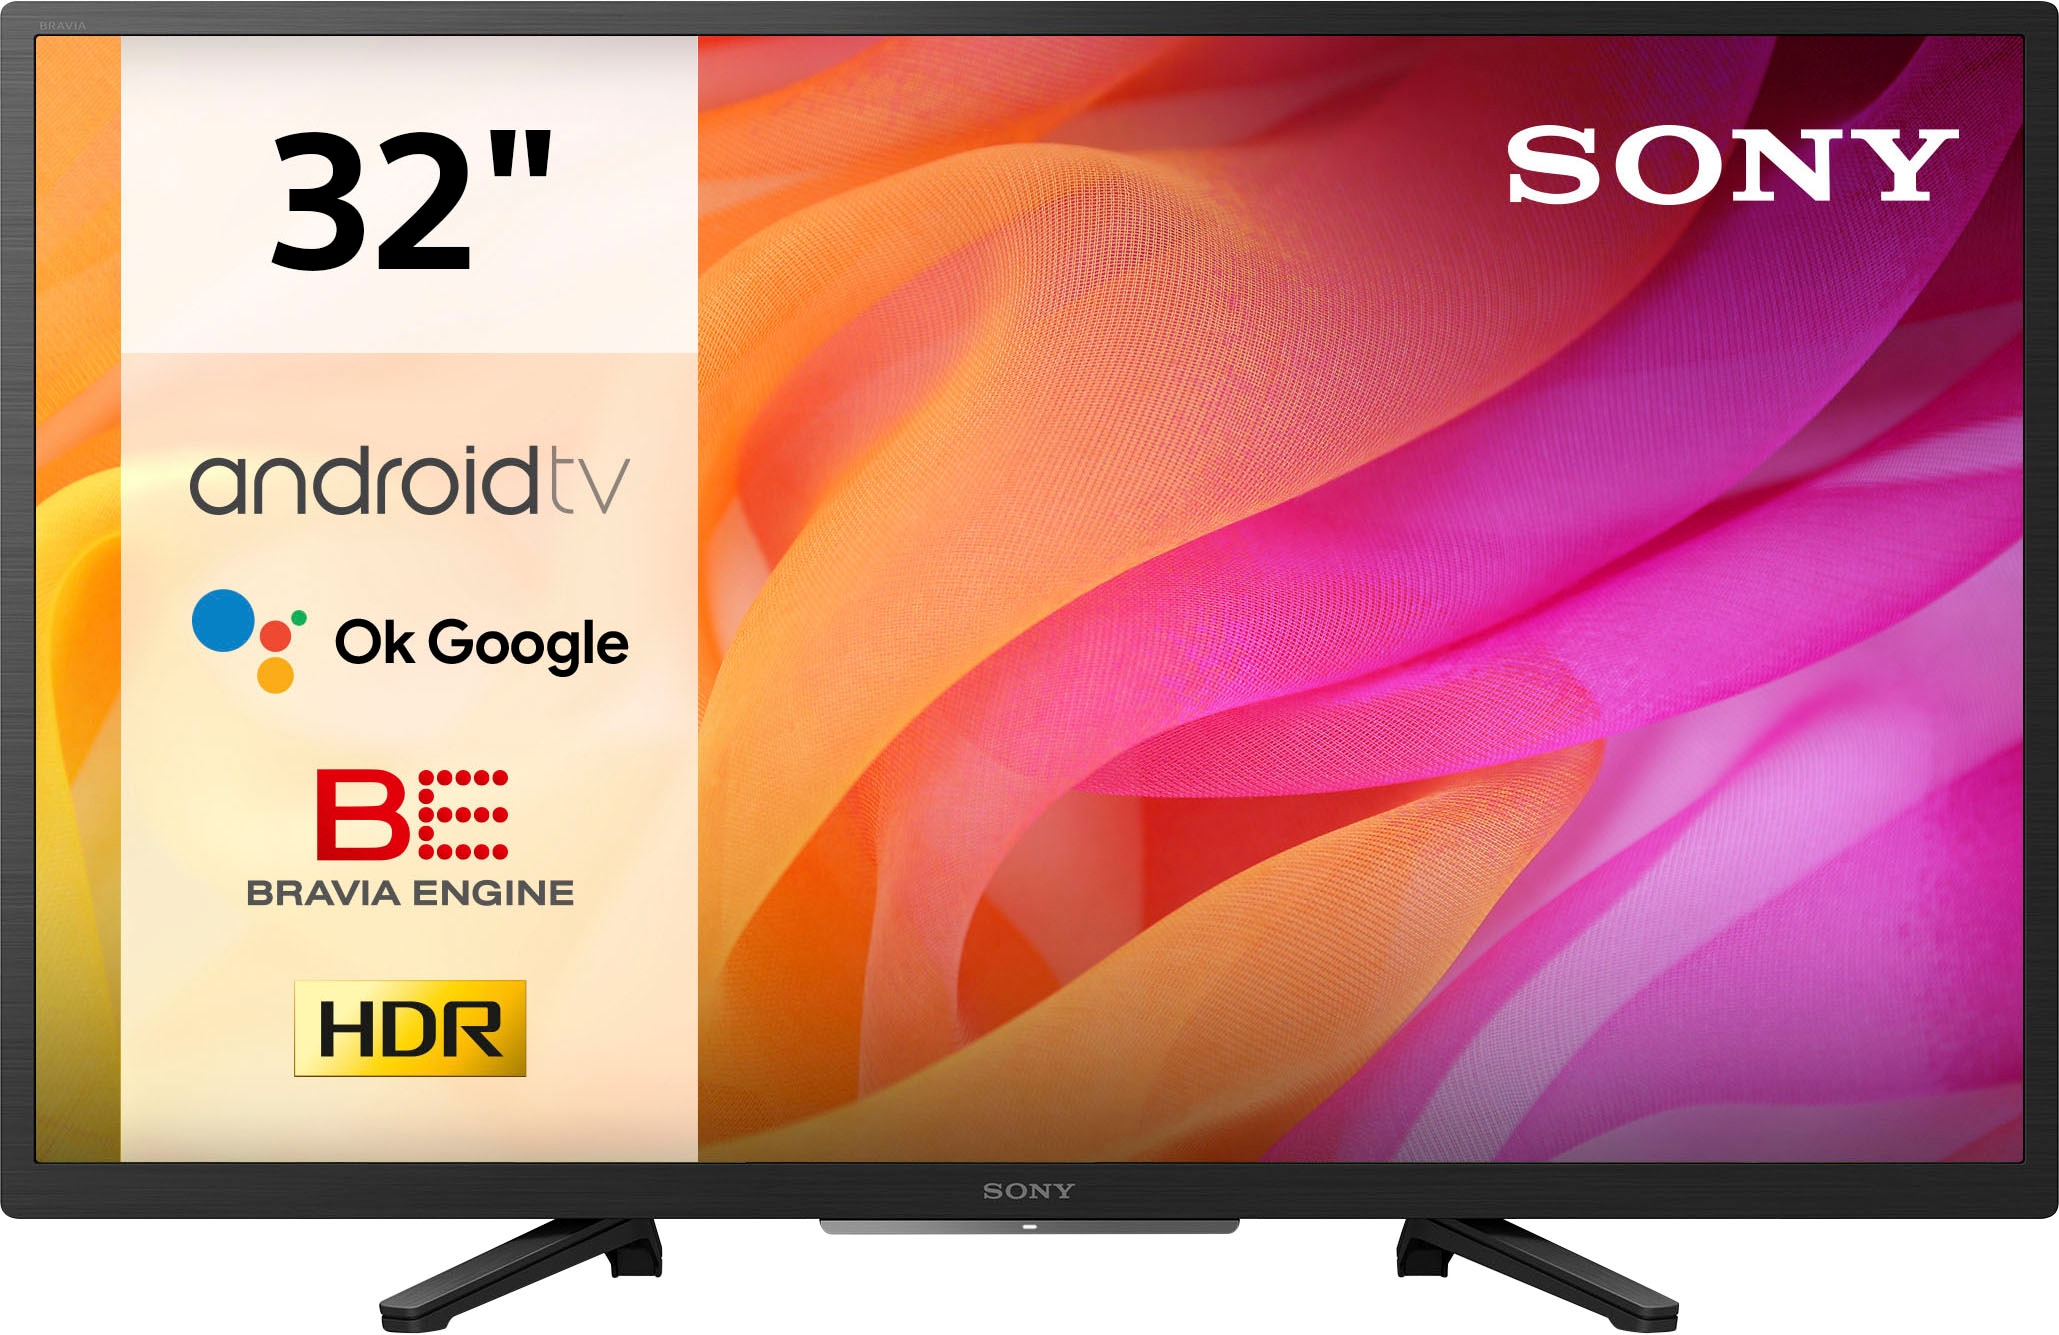 Sony LCD-LED HDR jetzt bei BRAVIA, HD WXGA, »KD-32800W/1«, Tuner, Android TV, Fernseher Zoll, Smart Heady, 80 Triple TV, cm/32 OTTO